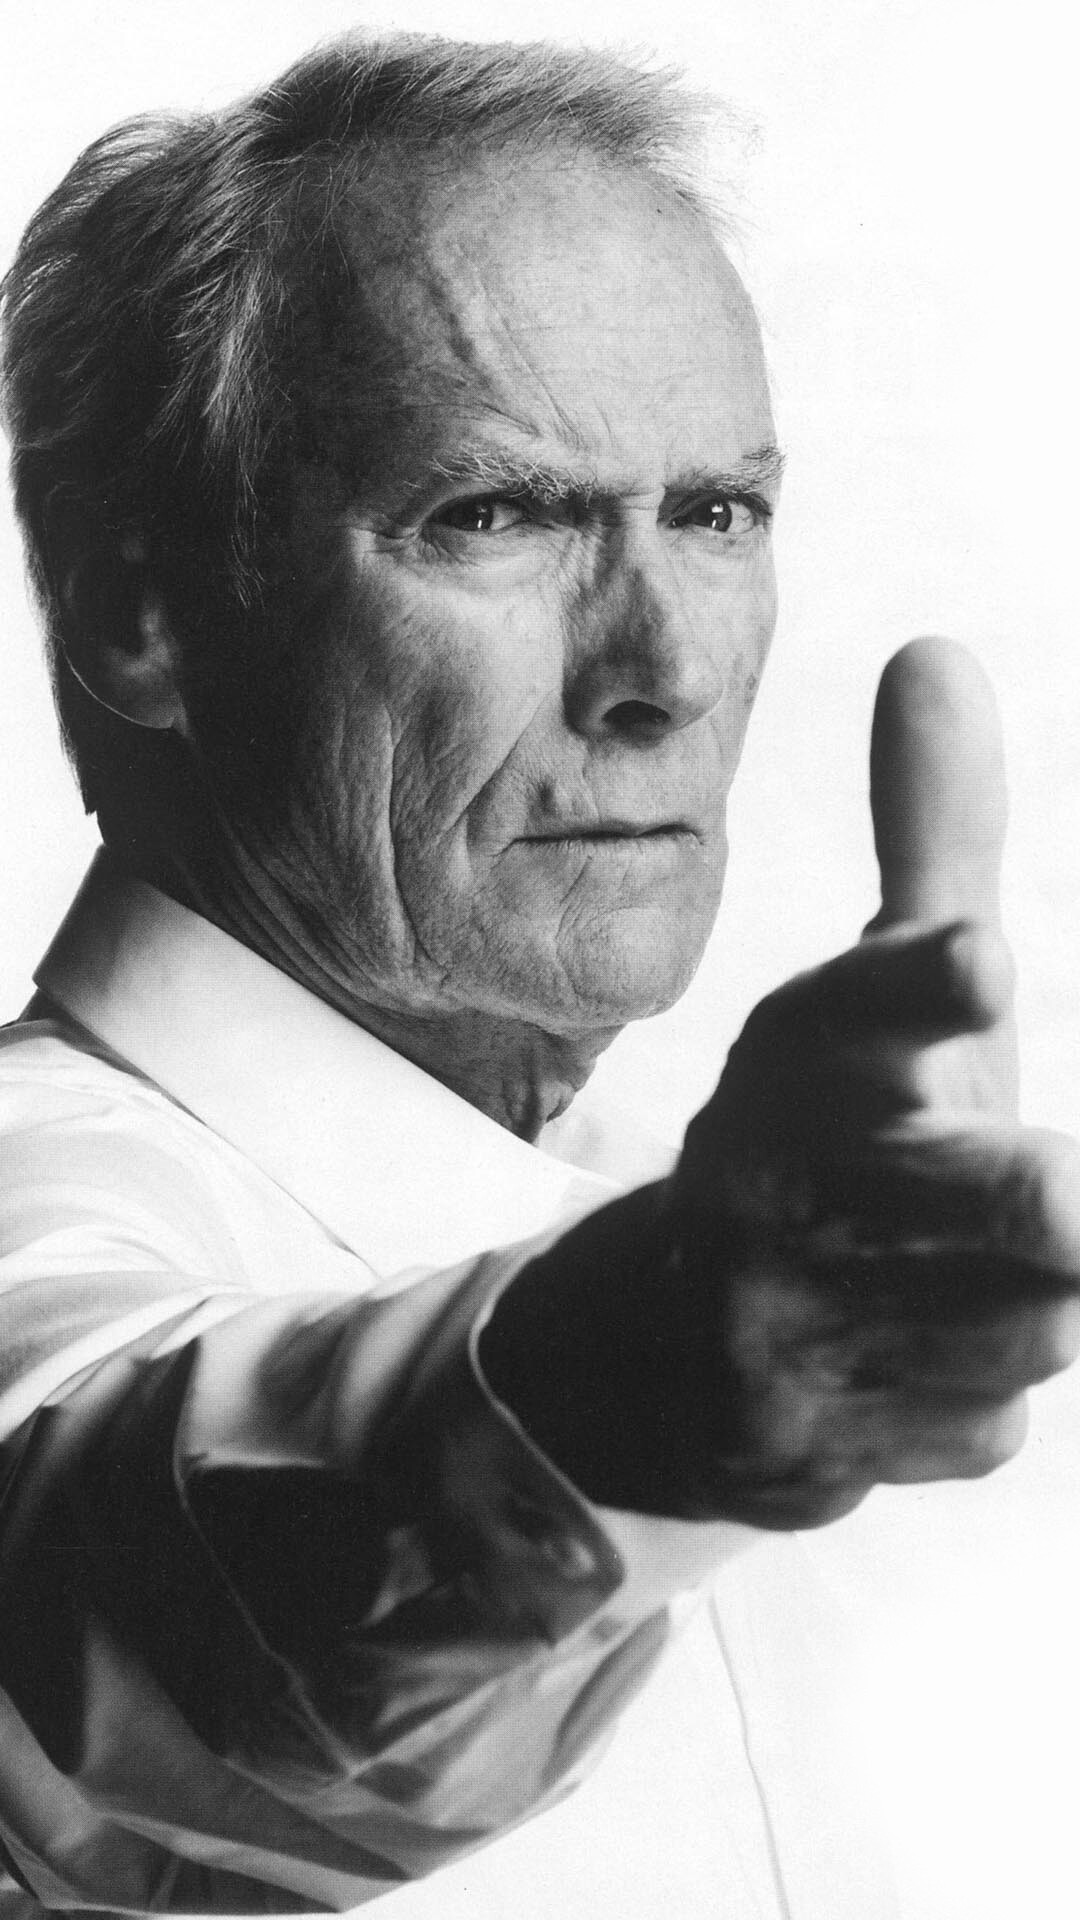 Clint Eastwood: Internationally Famous American Celebrity, The "Man With No Name". 1080x1920 Full HD Wallpaper.